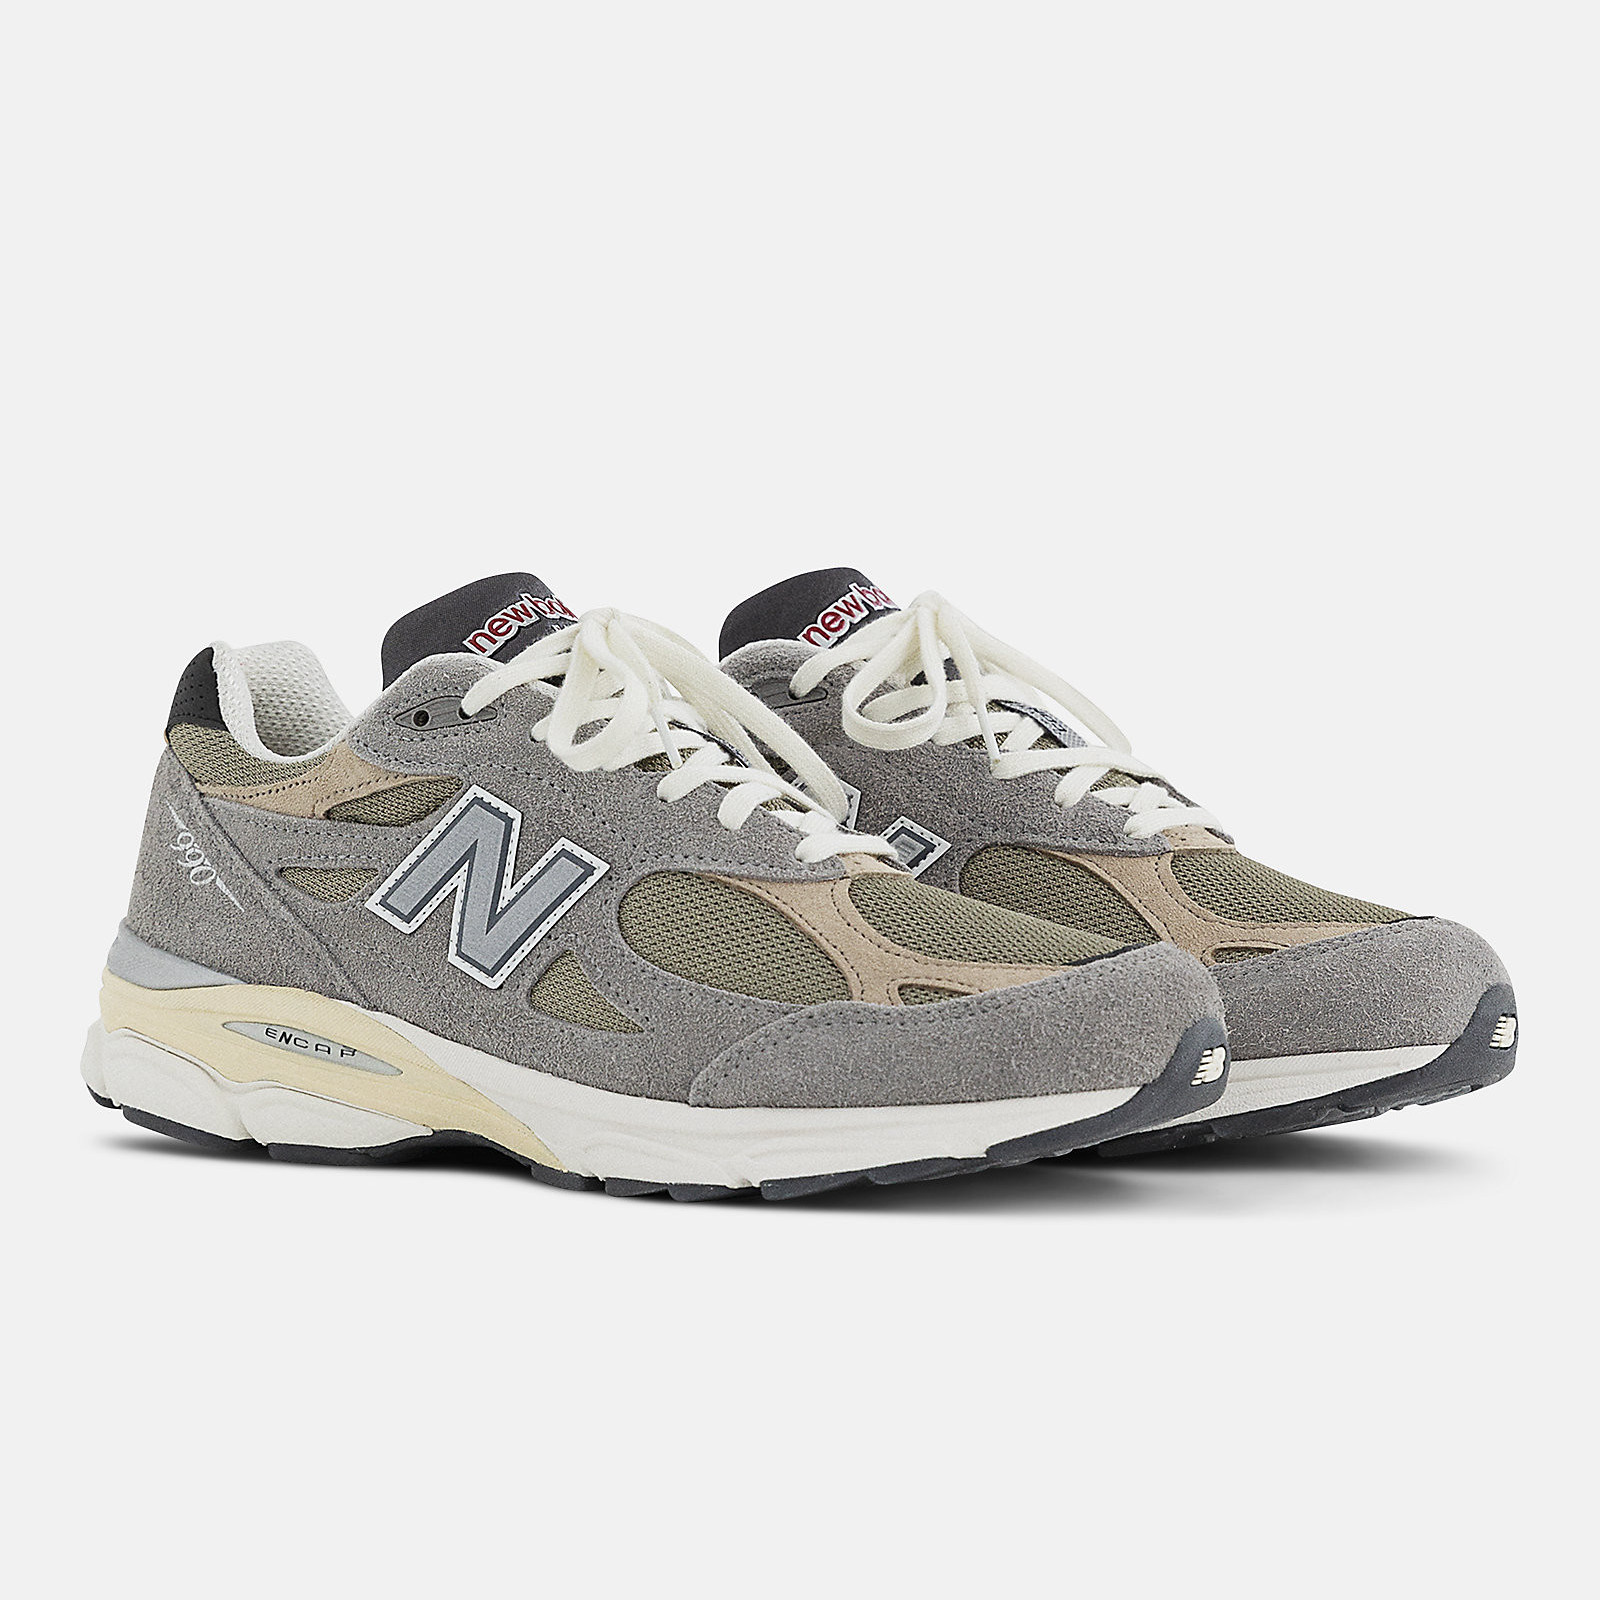 New Balance 990v3
Made In USA
« Marblehead »